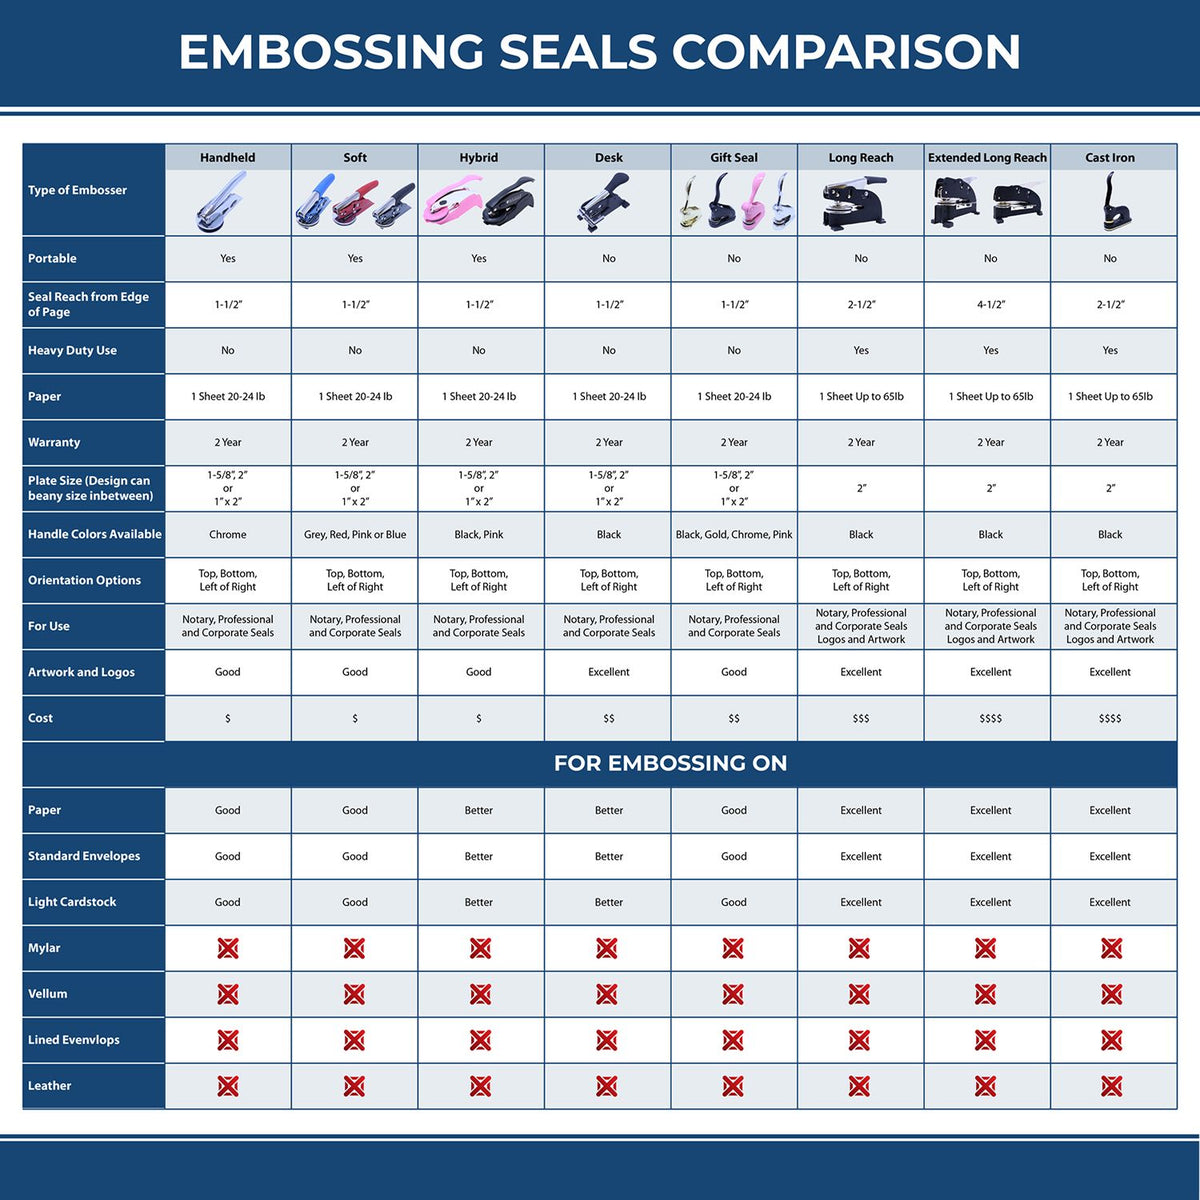 A comparison chart for the different types of mount models available for the Hybrid Alaska Land Surveyor Seal